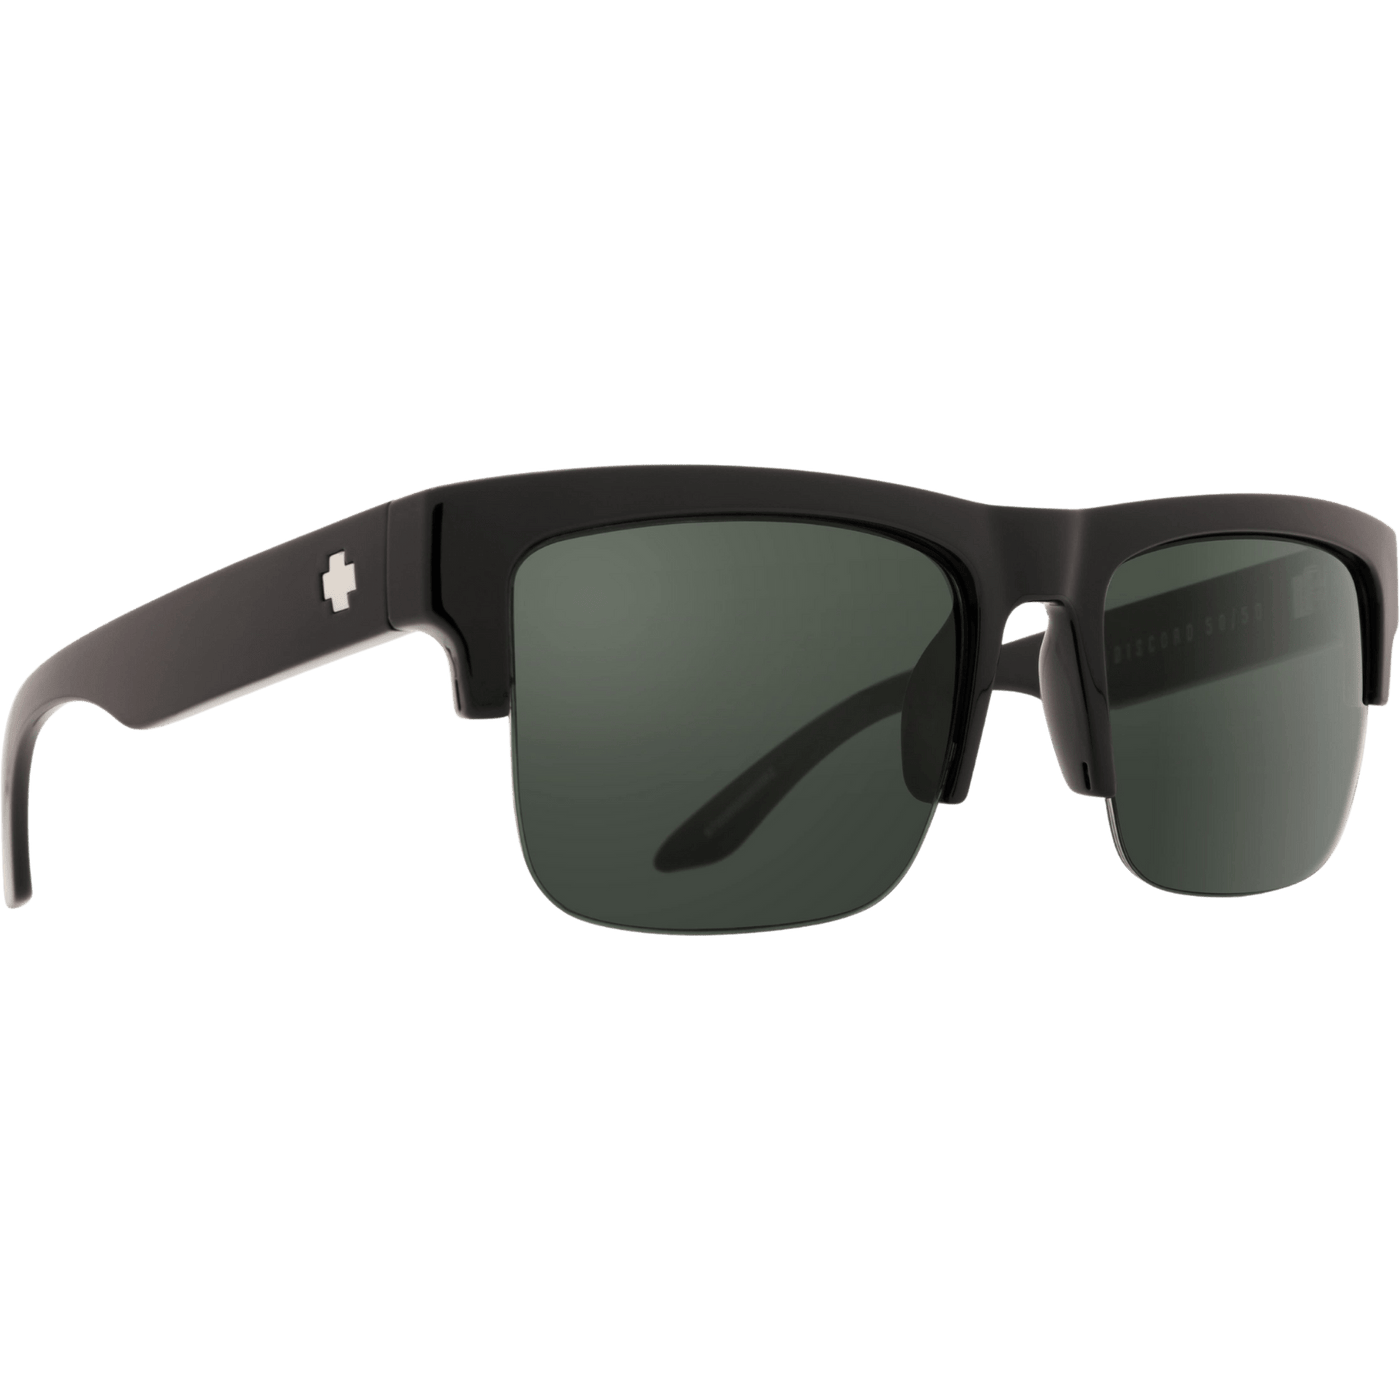 SPY DISCORD 5050 Sunglasses - Gray/Green 8Lines Shop - Fast Shipping